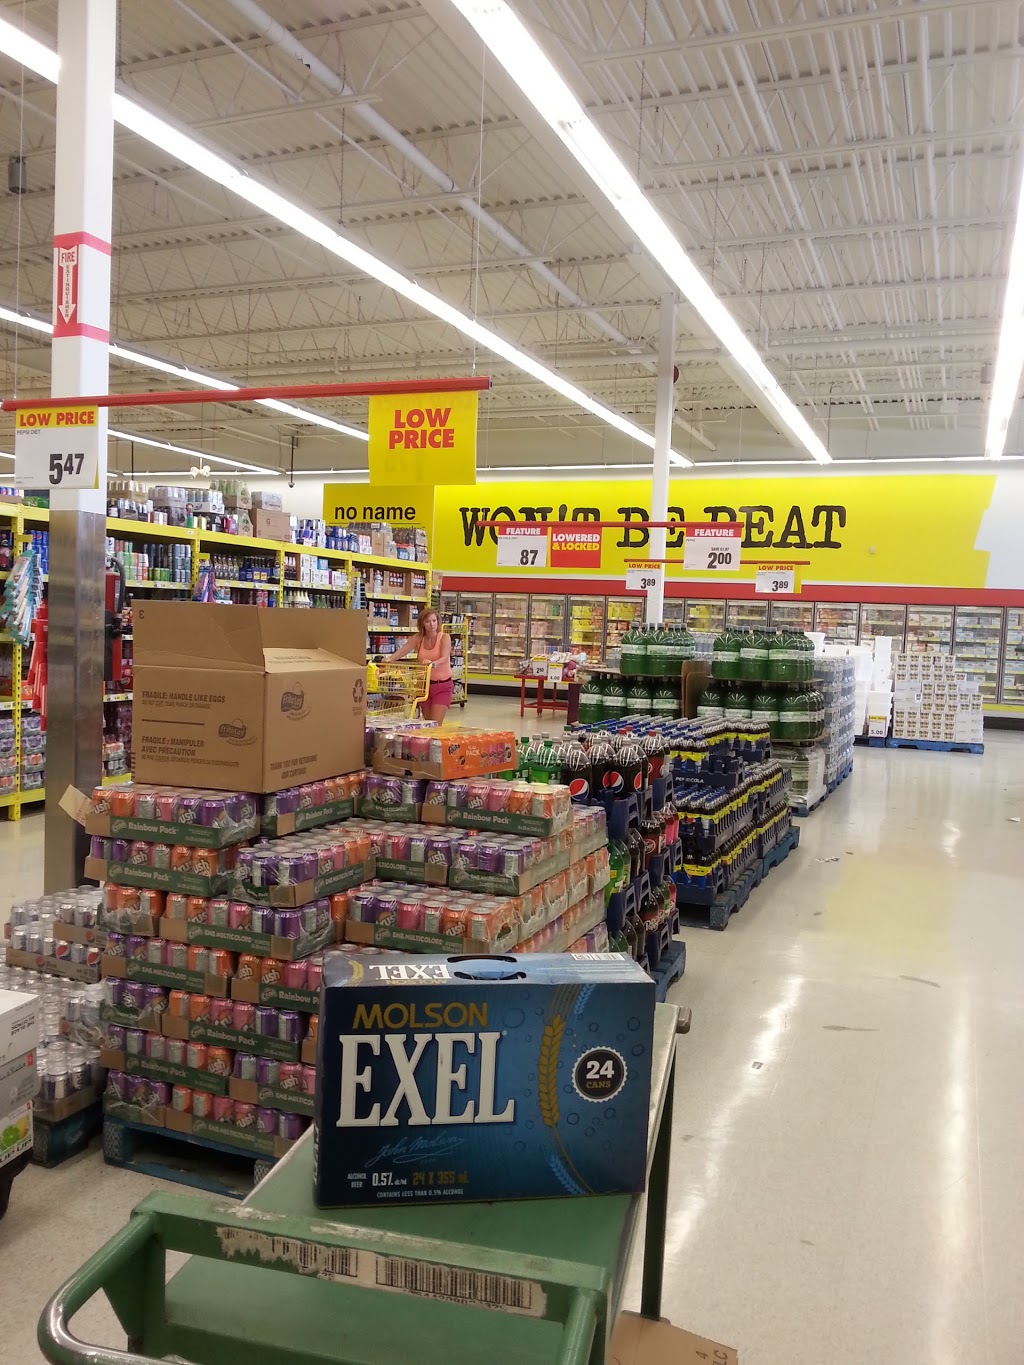 Jamie & Jaclyns No Frills | 450 Centre St N, Napanee, ON K7R 1P8, Canada | Phone: (866) 987-6453